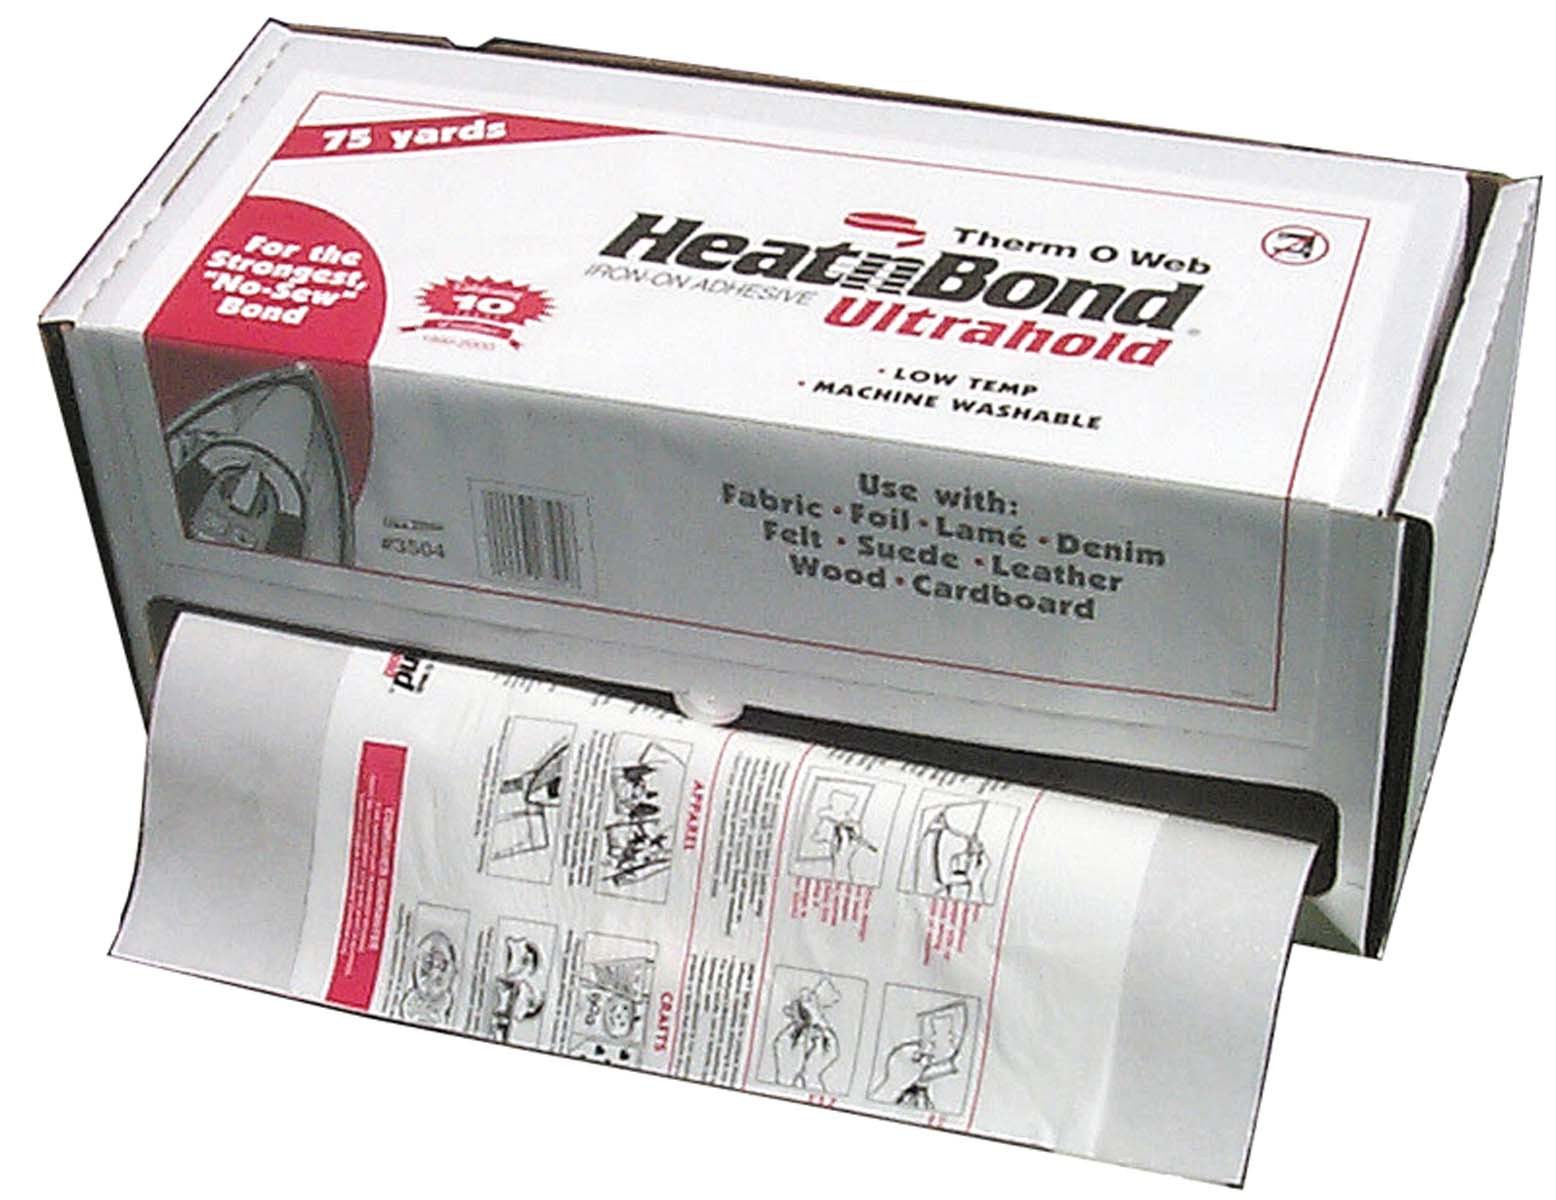 HeatnBond ULTRAHOLD Double-Sided Paperbacked Adhesive. Made in the